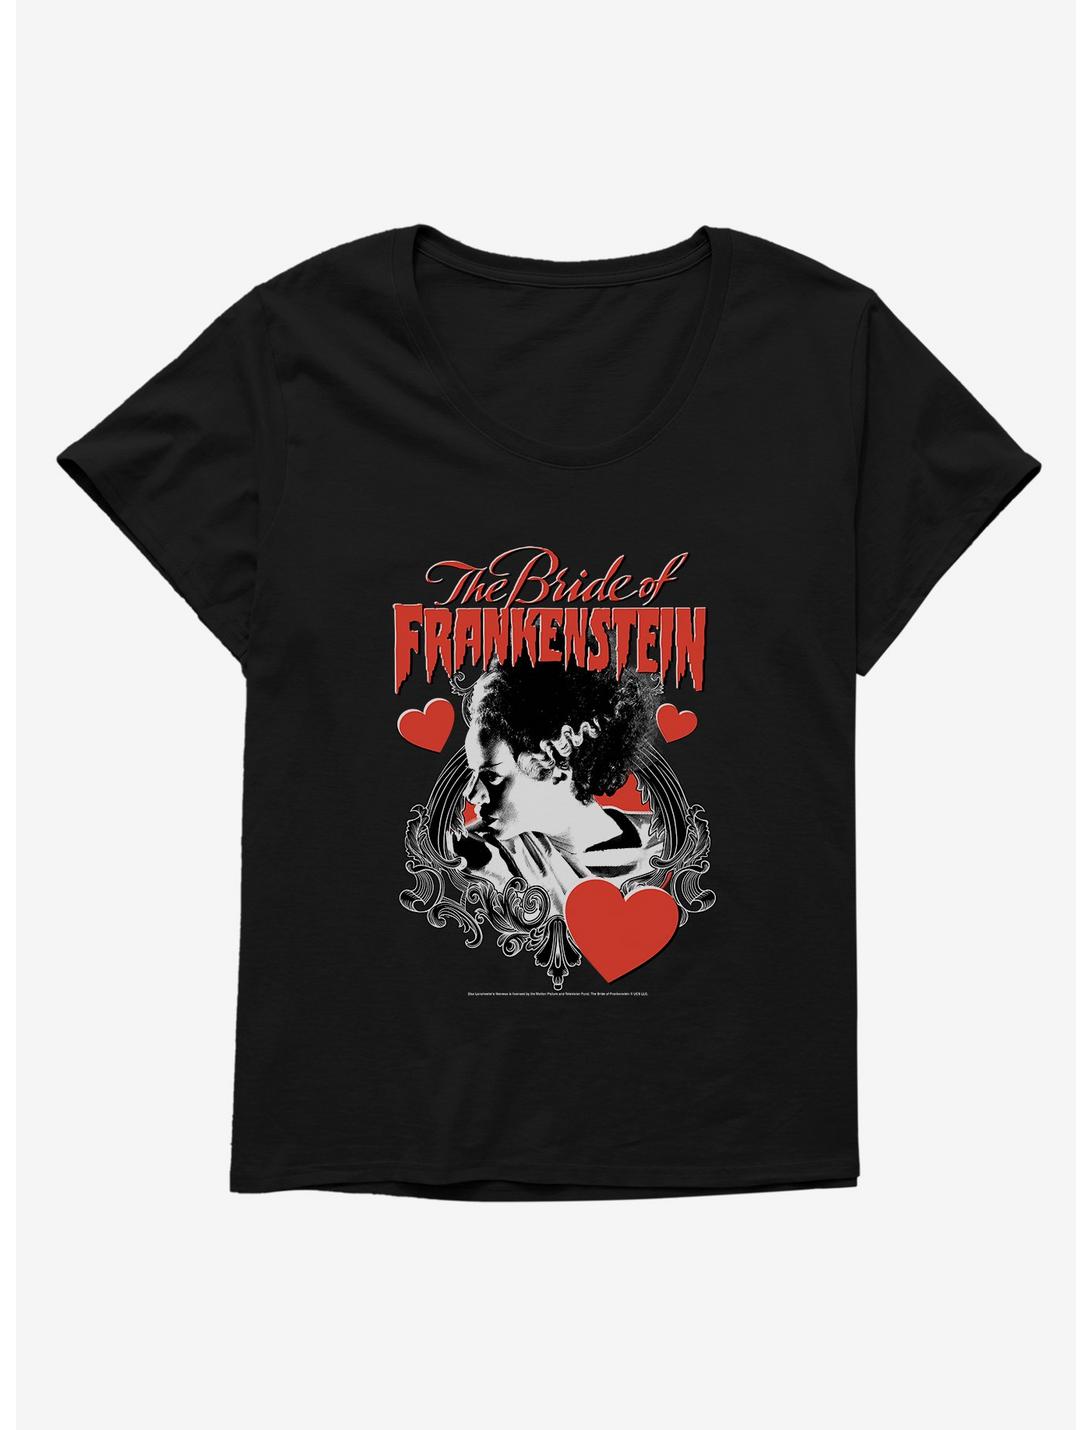 The Bride Of Frankenstein Bride With Hearts Girls T-Shirt Plus Size, BLACK, hi-res